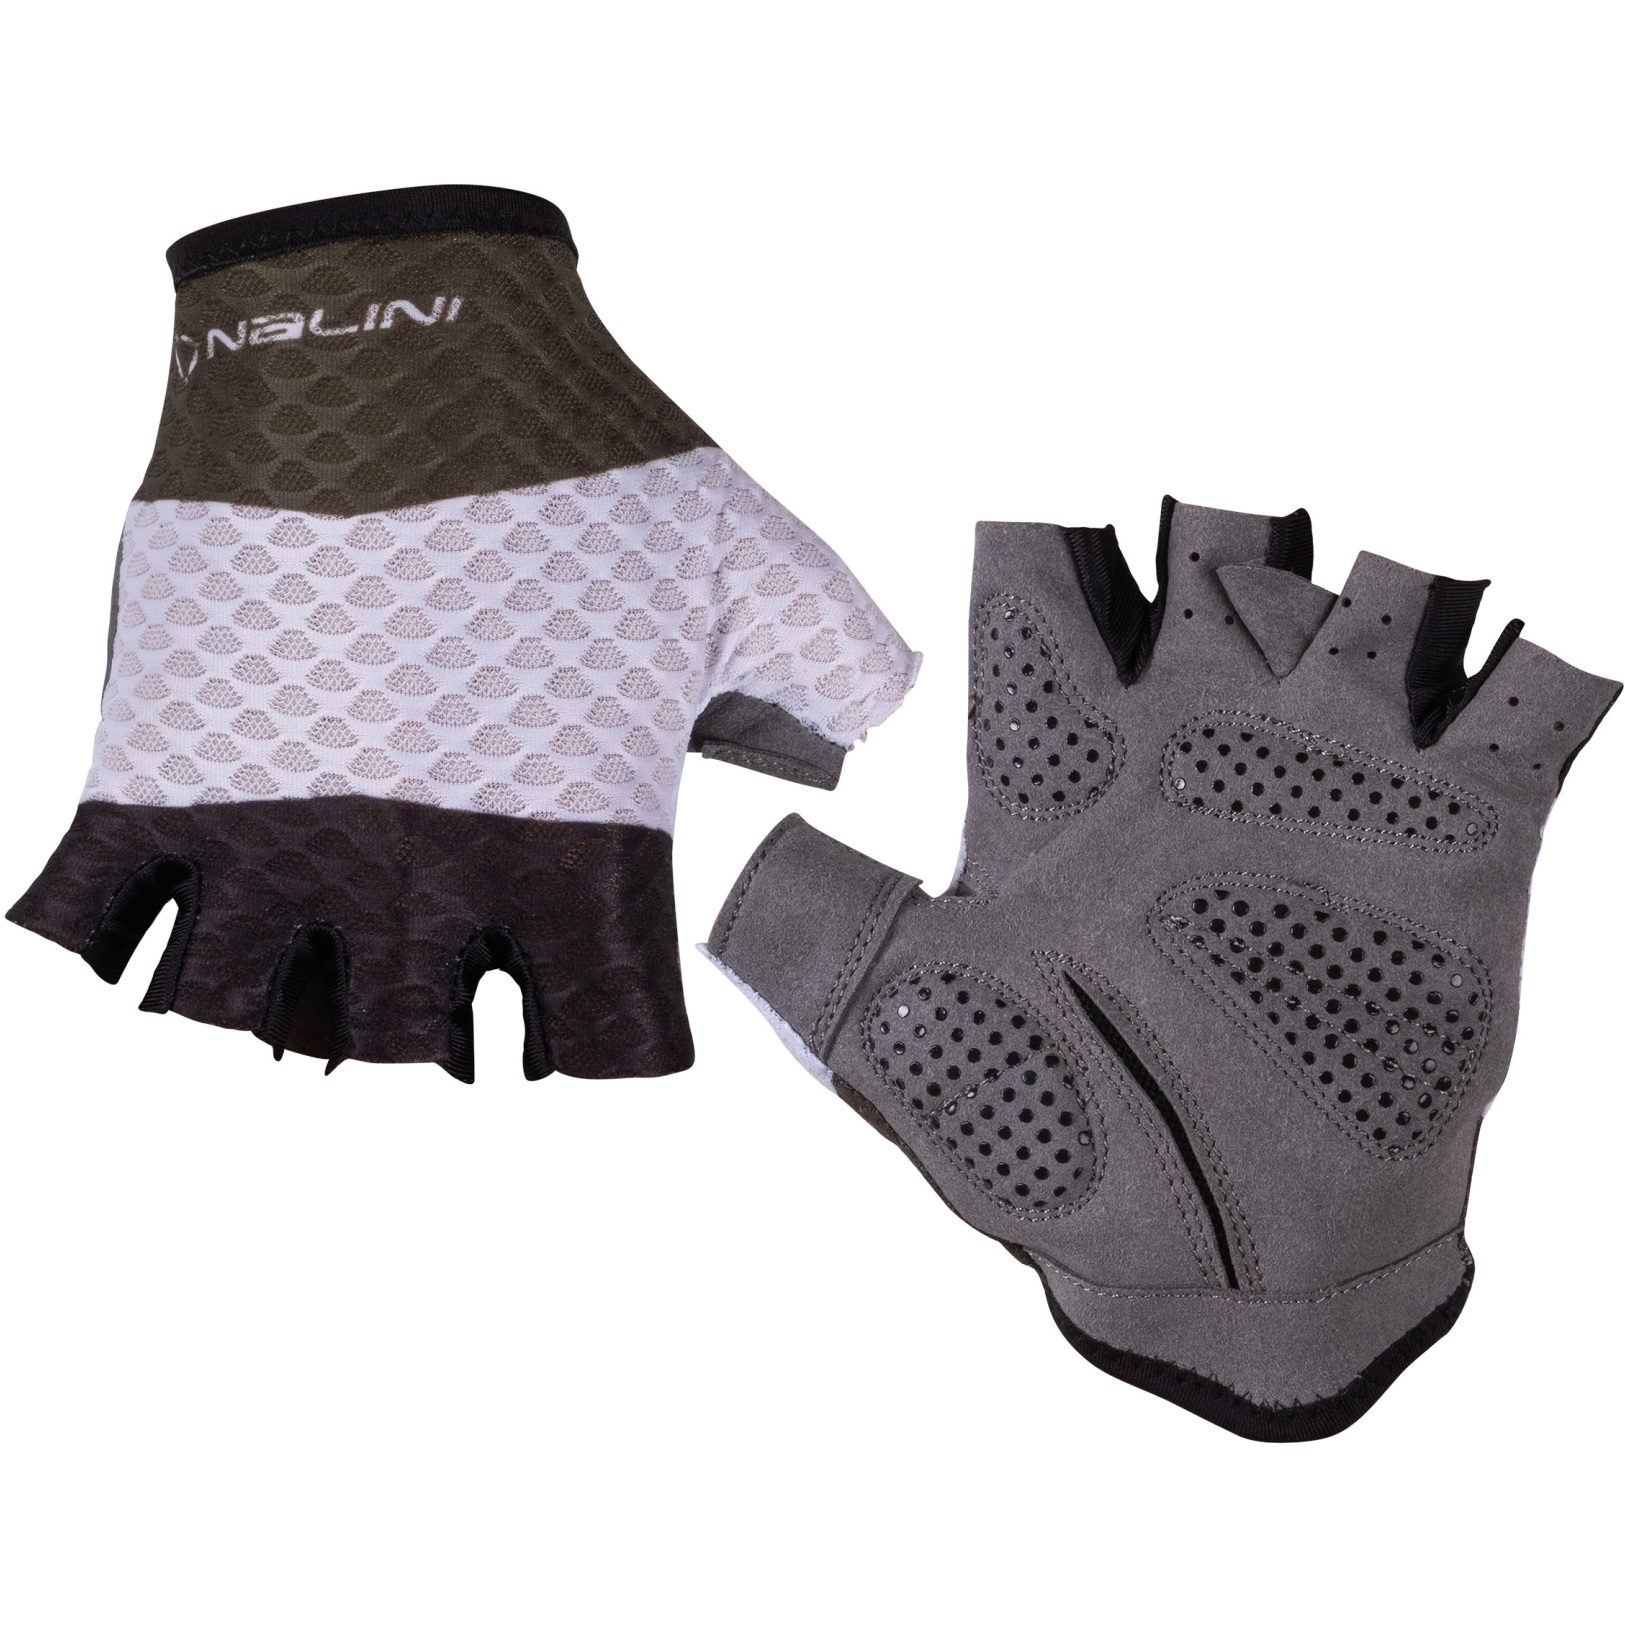 Picture of Nalini New Summer Cycling Gloves - forest green/black 4400